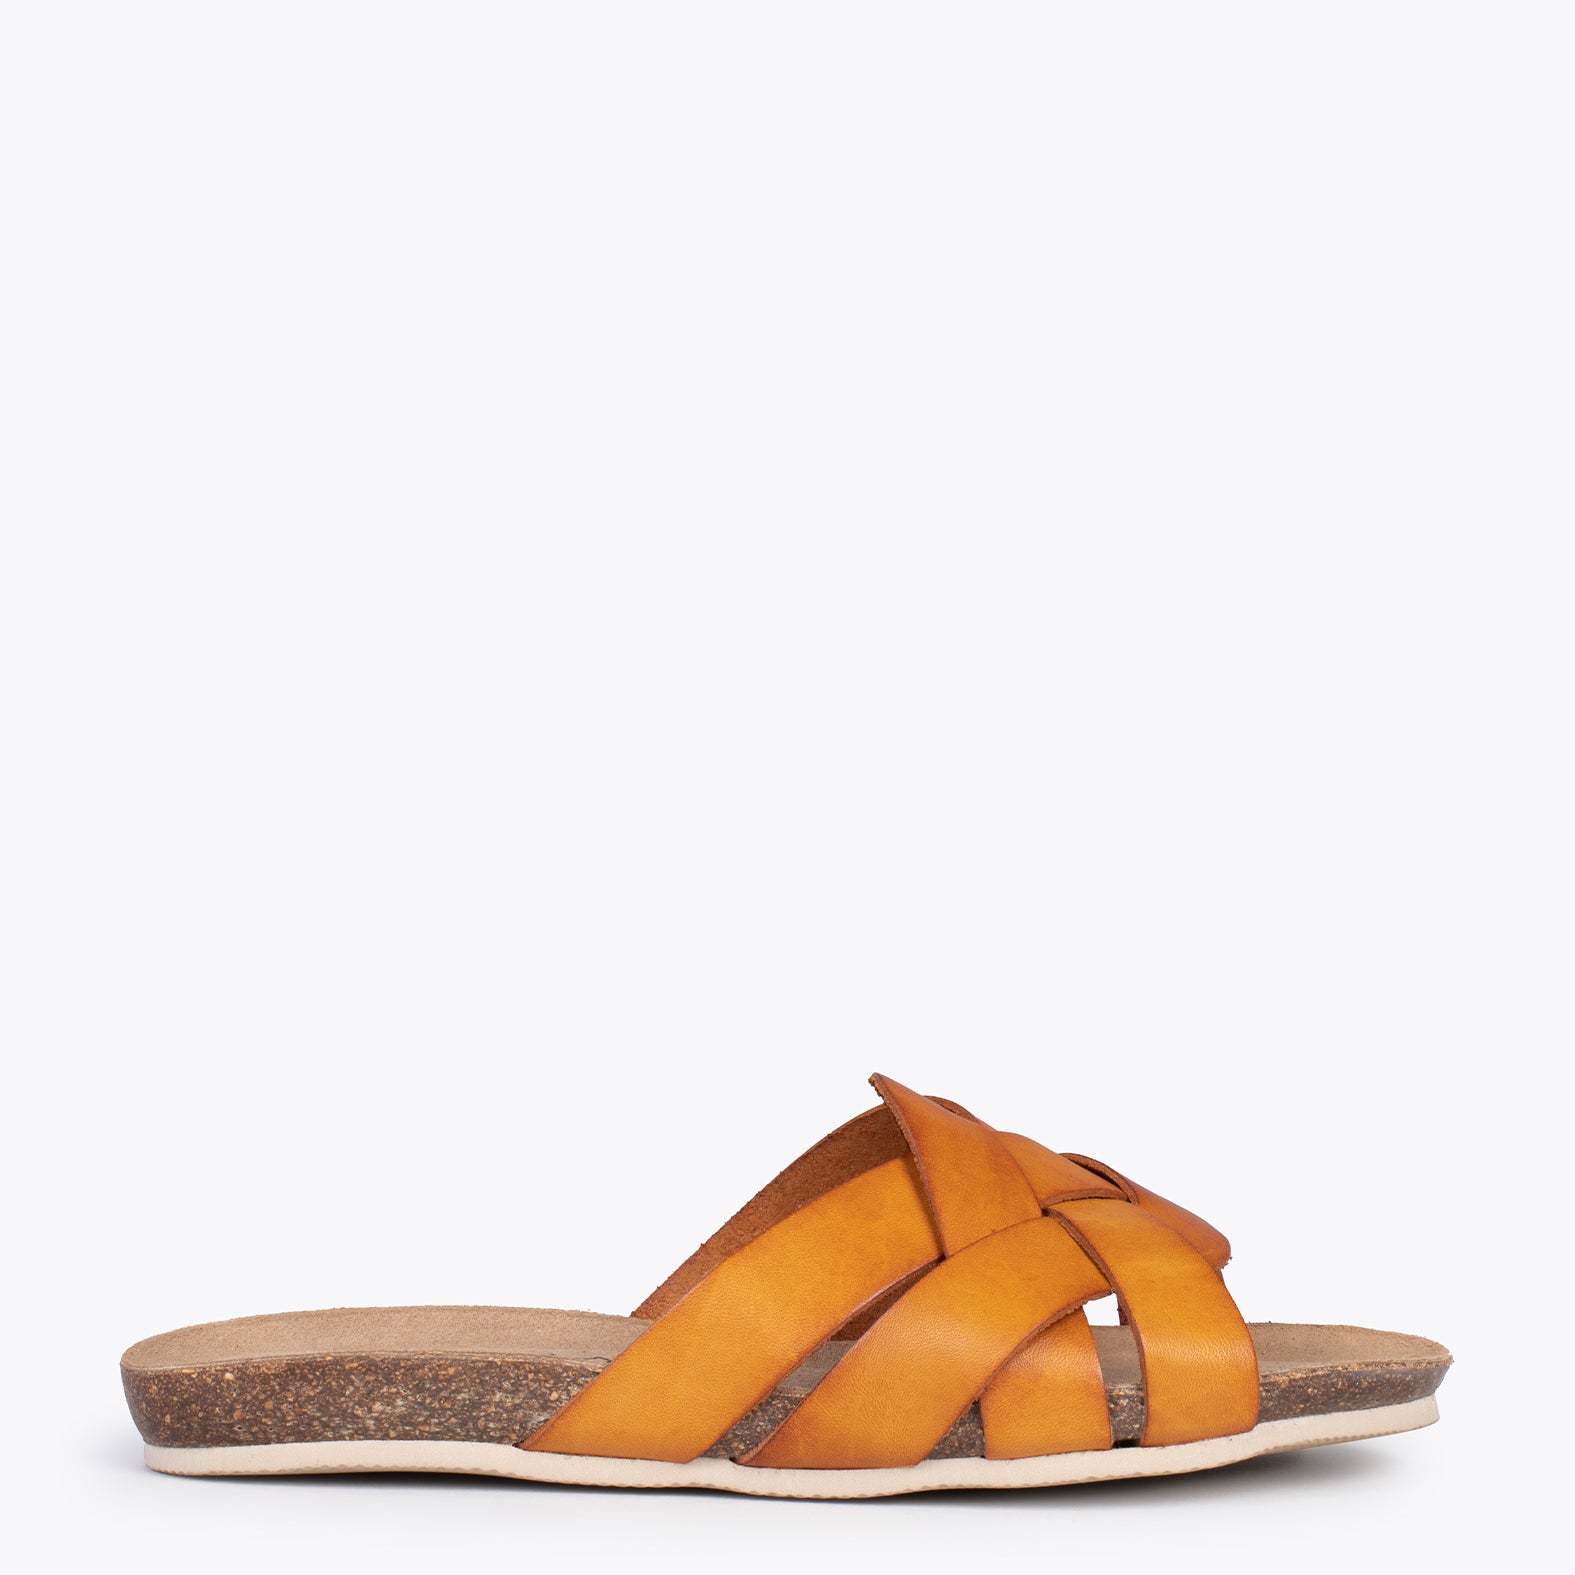 DHALIA – YELLOW slides with braided upper